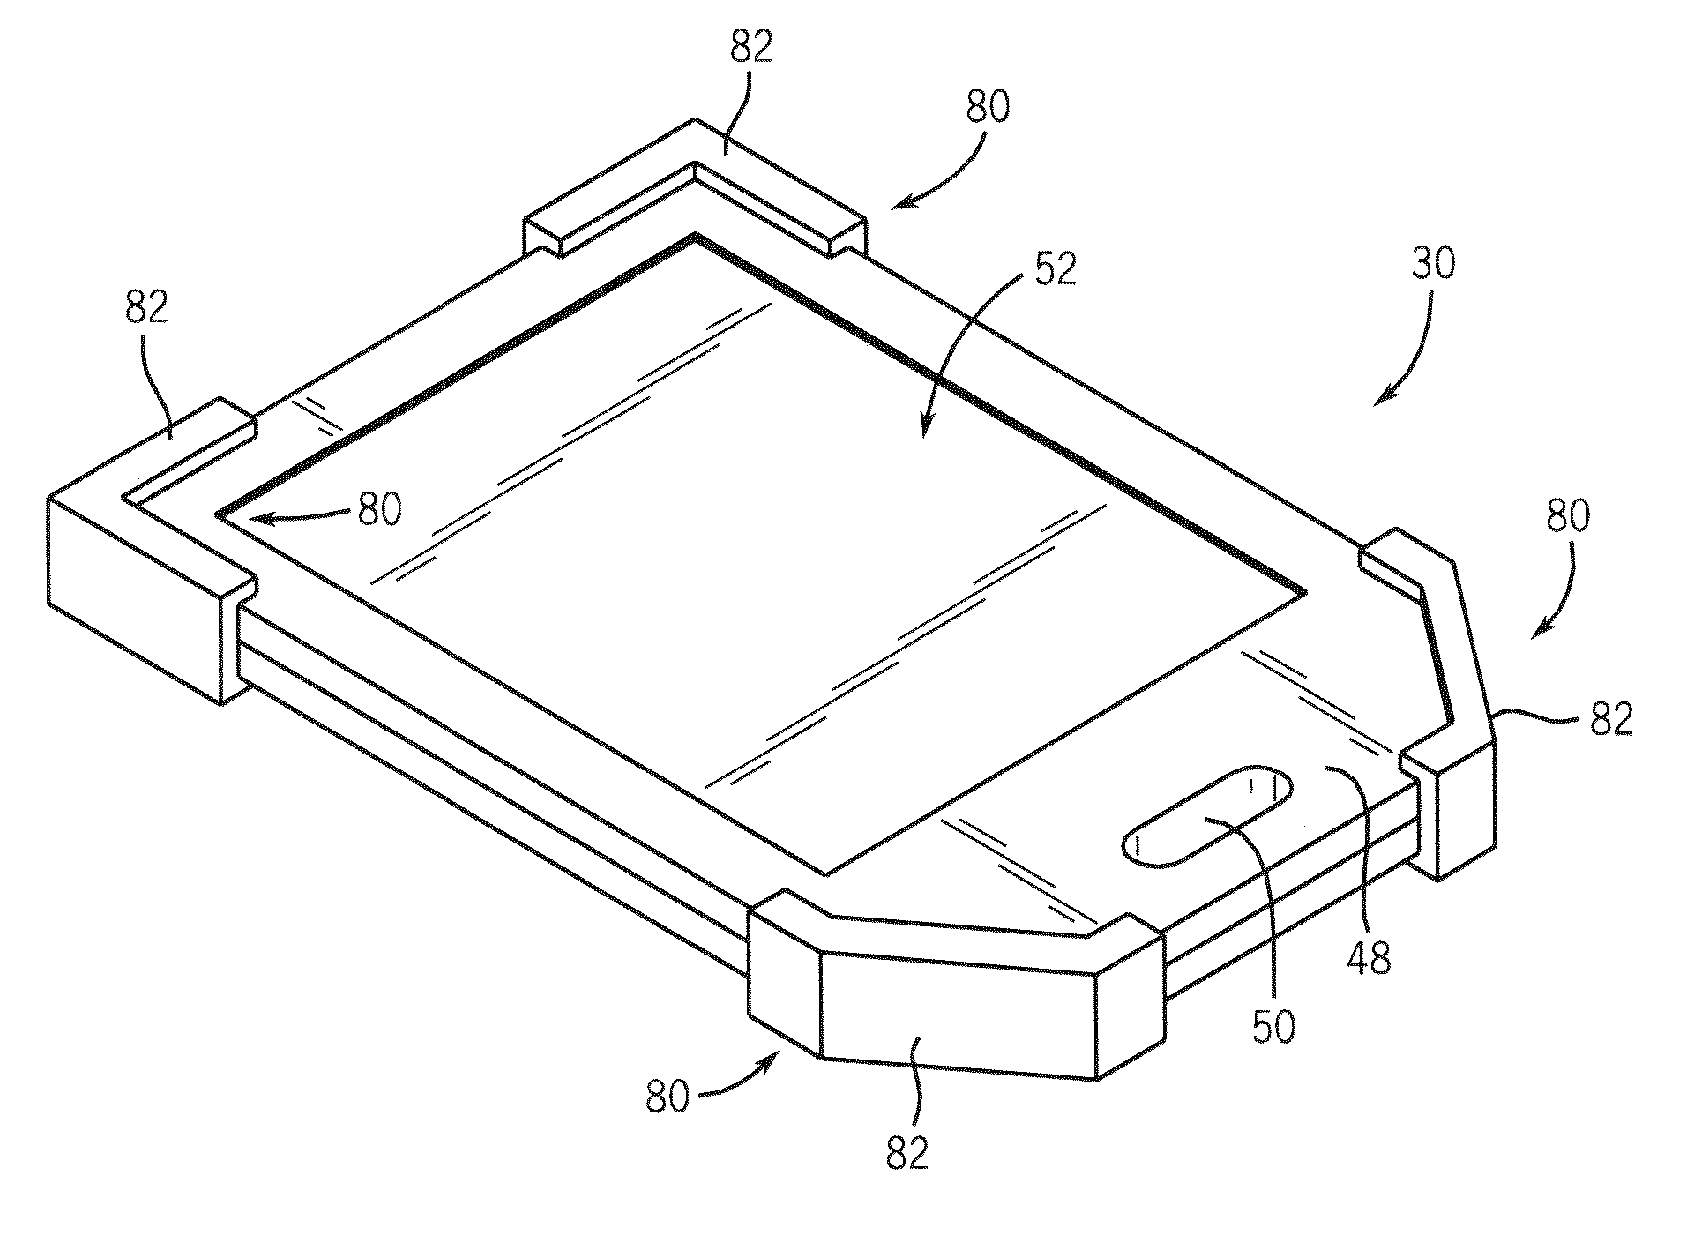 X-ray detector with impact absorbing cover